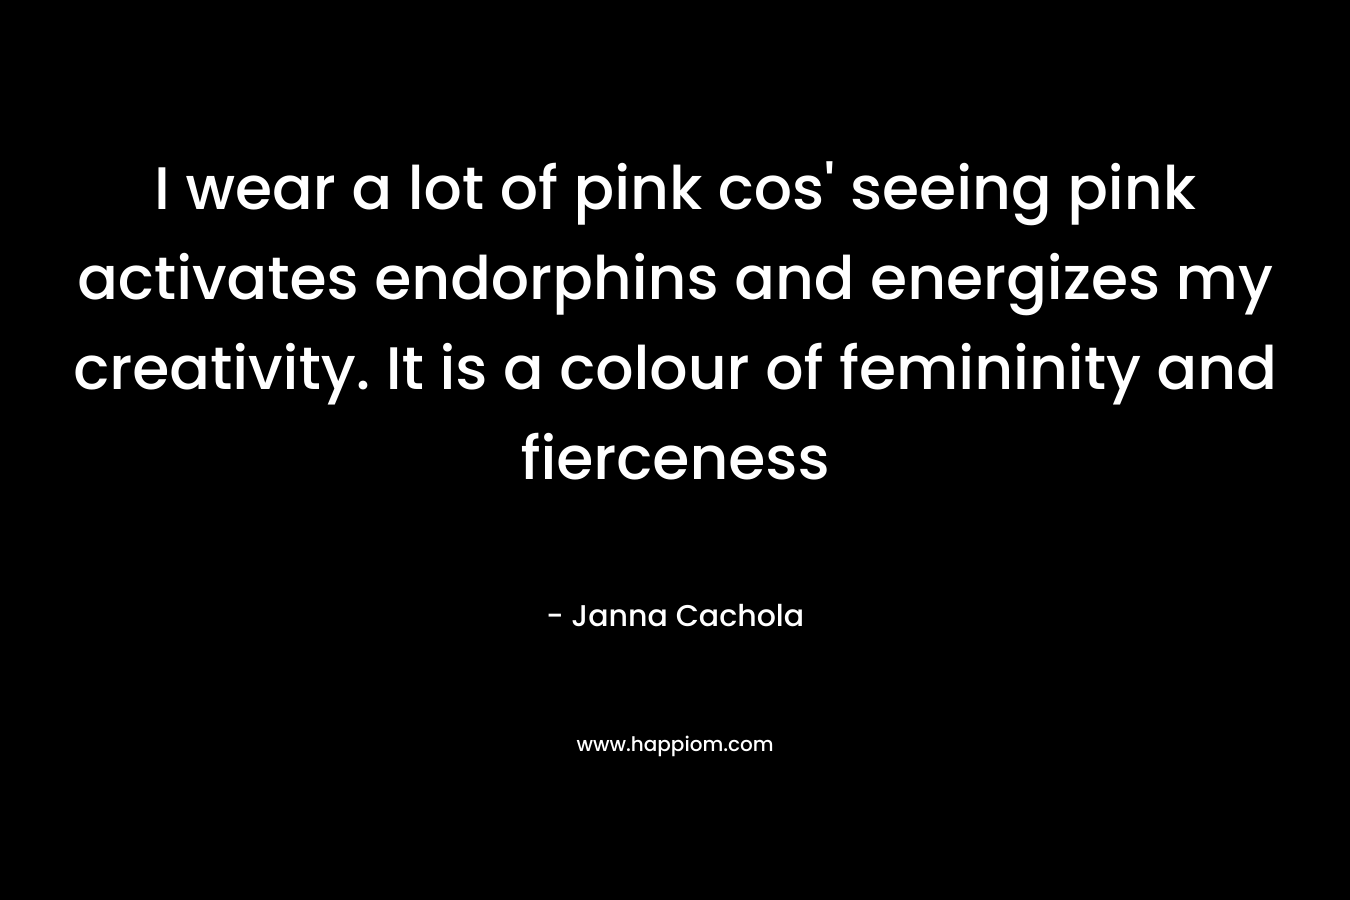 I wear a lot of pink cos' seeing pink activates endorphins and energizes my creativity. It is a colour of femininity and fierceness